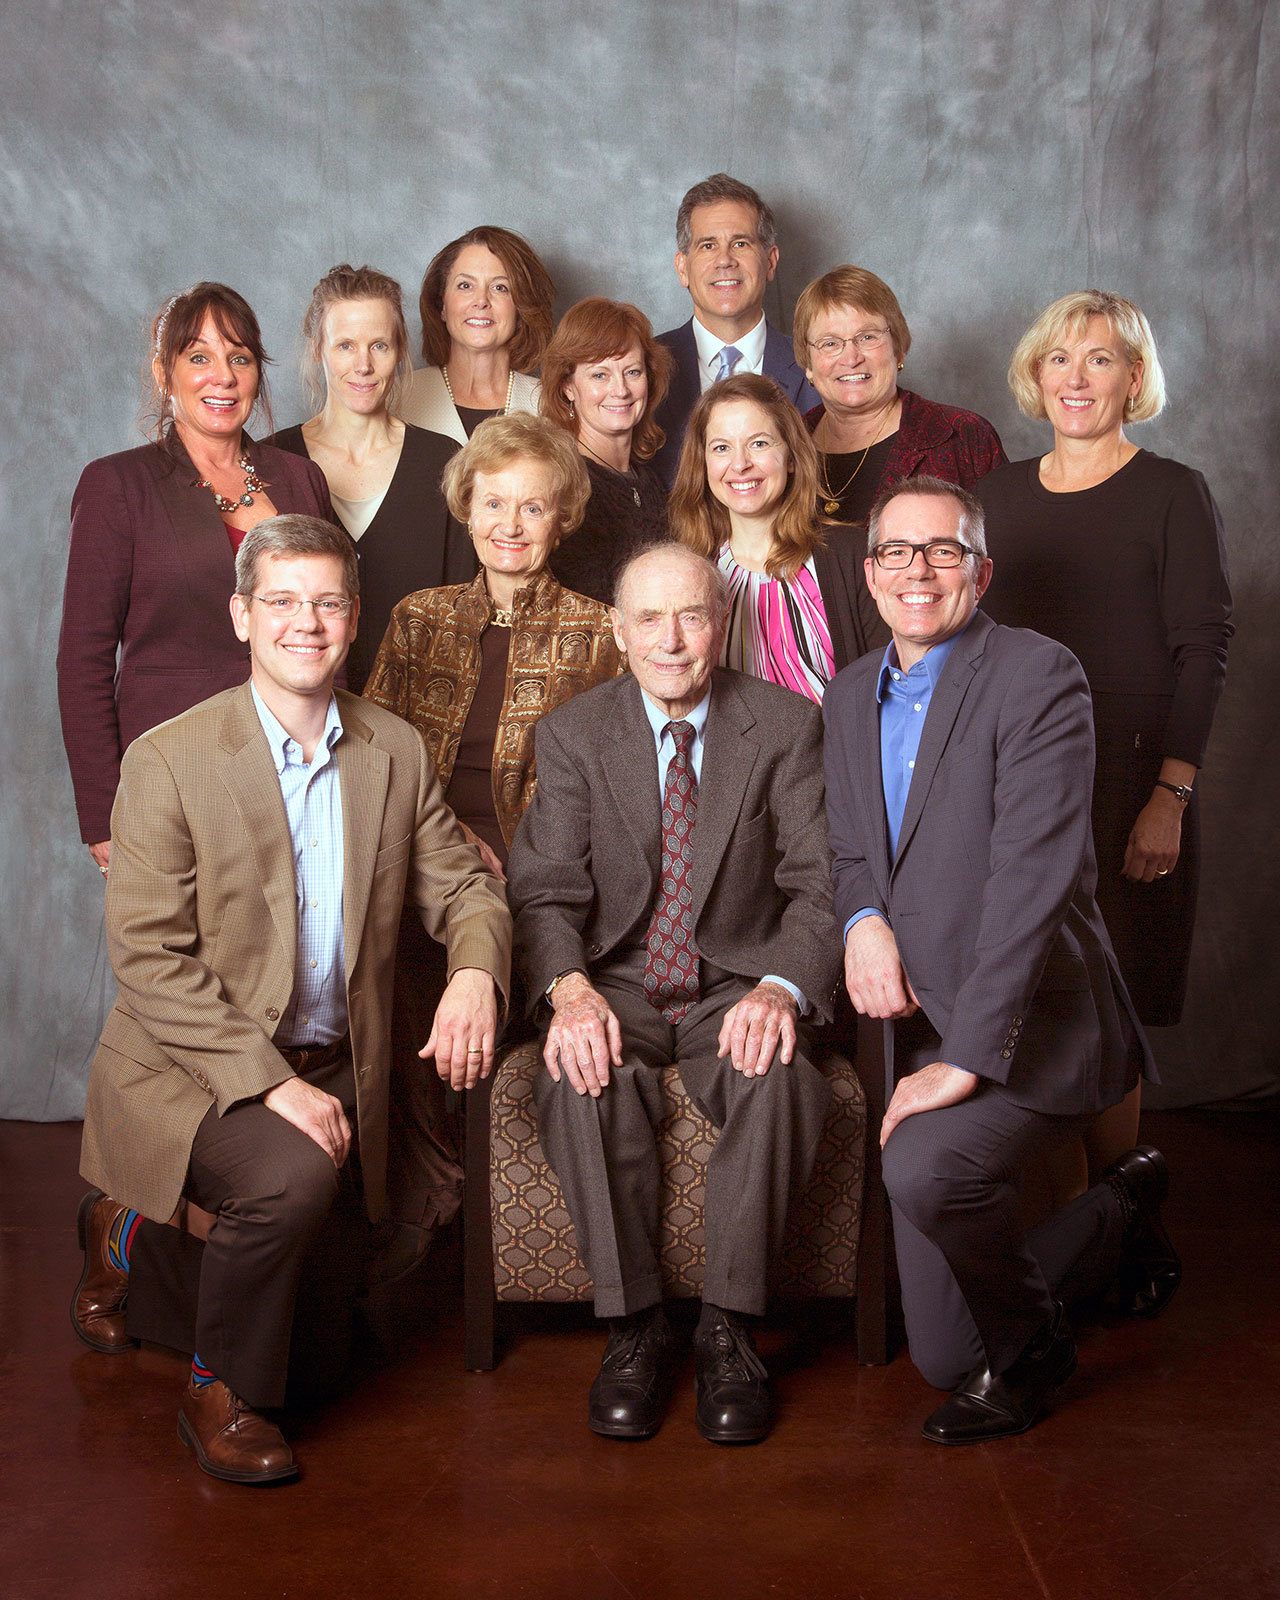 Martha & Mary presented its 2016 Philanthropy Awards to the Helen Langer Smith family and Kitsap Bank. Pictured here are members of the Langer Smith family and Kitsap Bank executives with Martha & Mary leadership at the Donor Appreciation event: Back Row (l-r): Marlene Mitchell, Stephanie Smith, Lynette Ladenburg, Bonnie Olson, Steve Politakis, Helen Stoll, Cydly Langer-Smith; Front Row (l-r): Brad Gitch, Helen Langer Smith, Buz Smith, Lael Alecci, Alan Crain. Contributed